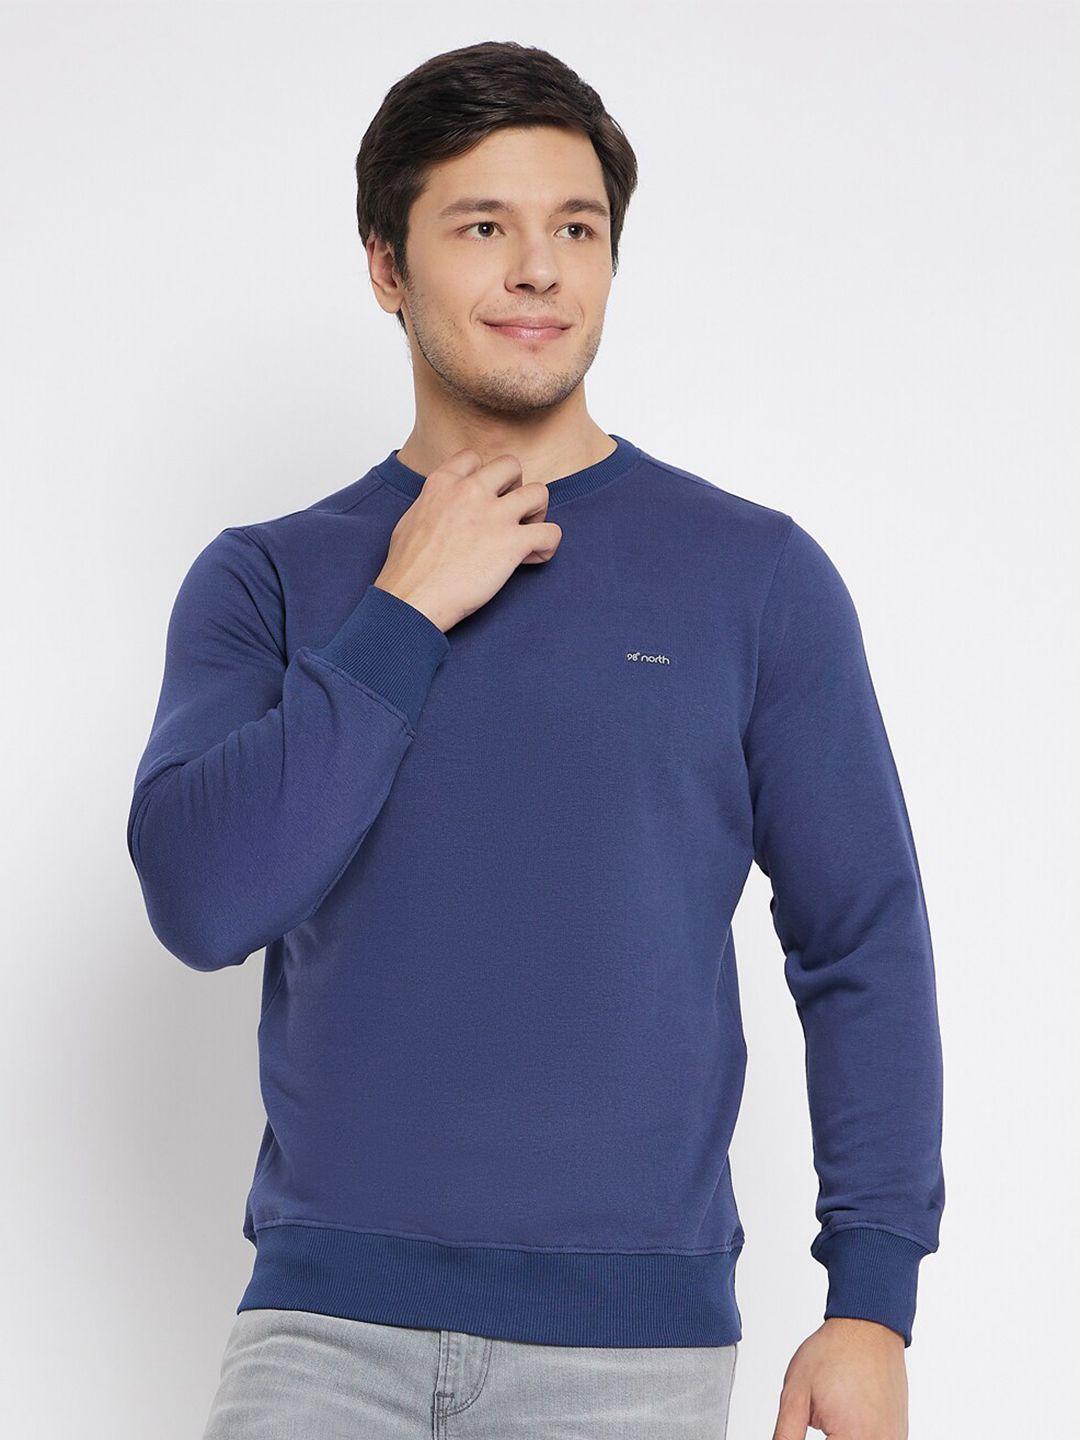 98 degree north round neck long sleeves fleece pullover